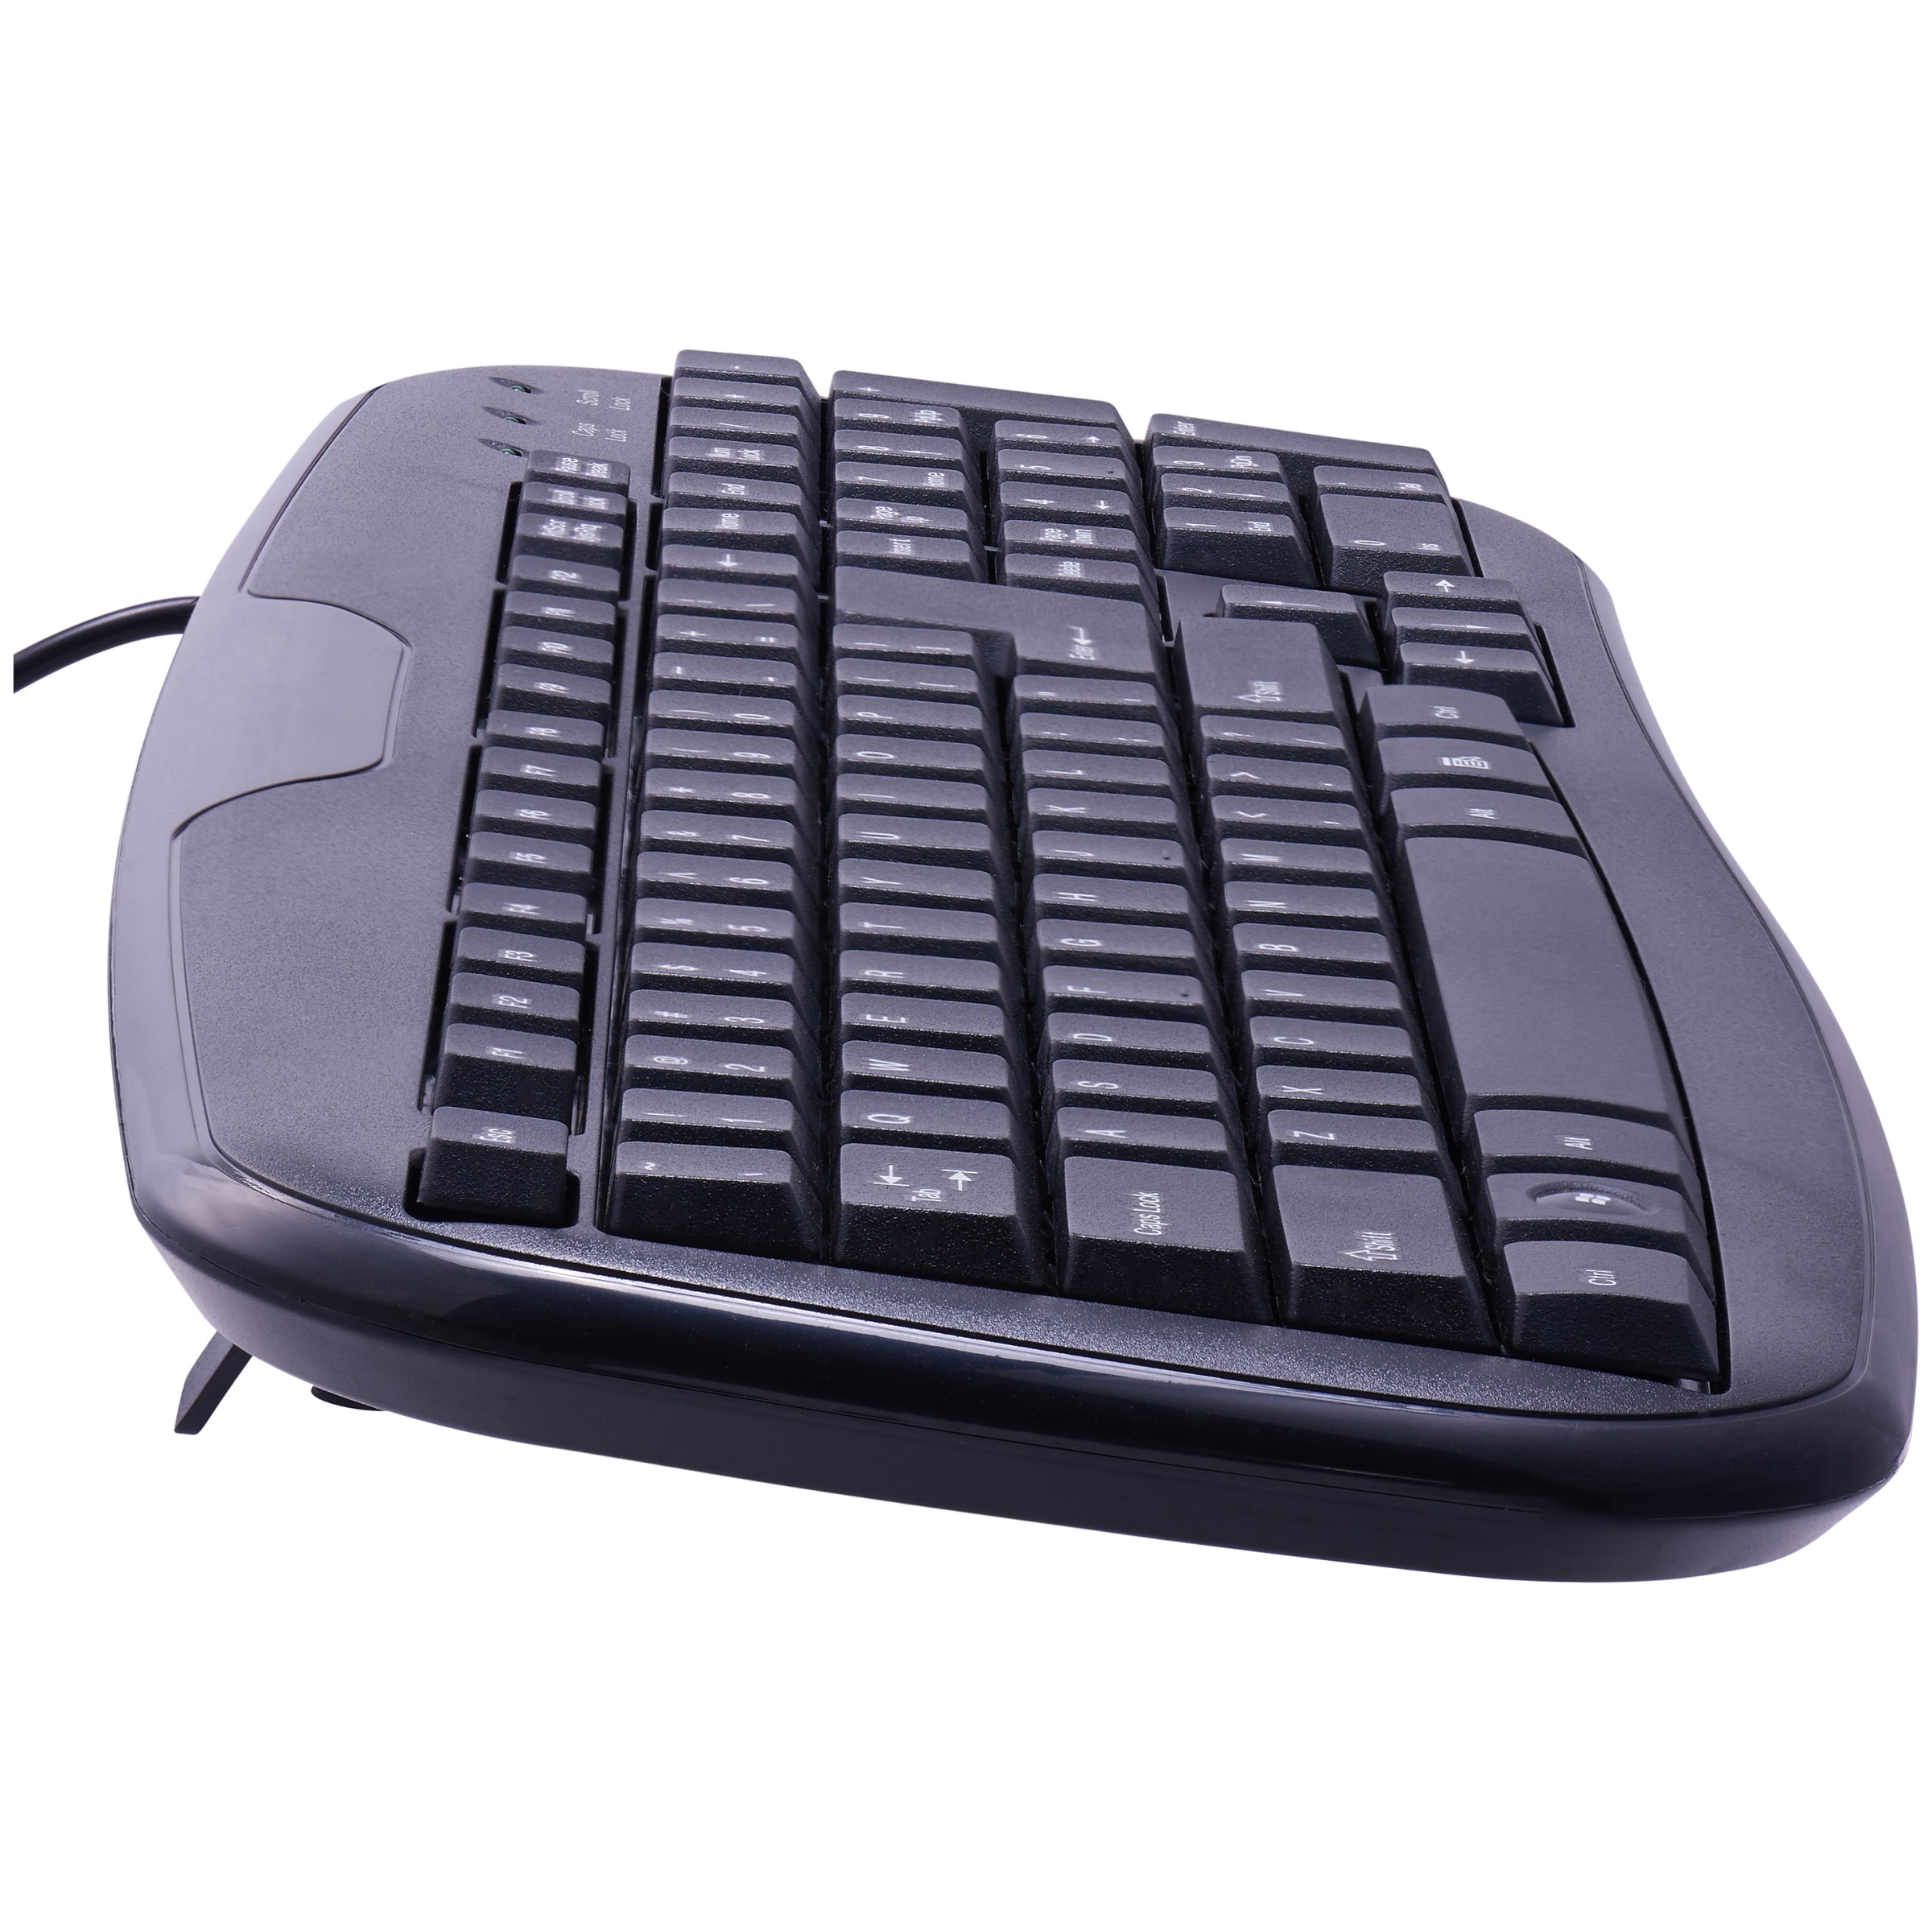 Onn Usb Connected Soft-Touch Wired Keyboard, Black - image 3 of 4